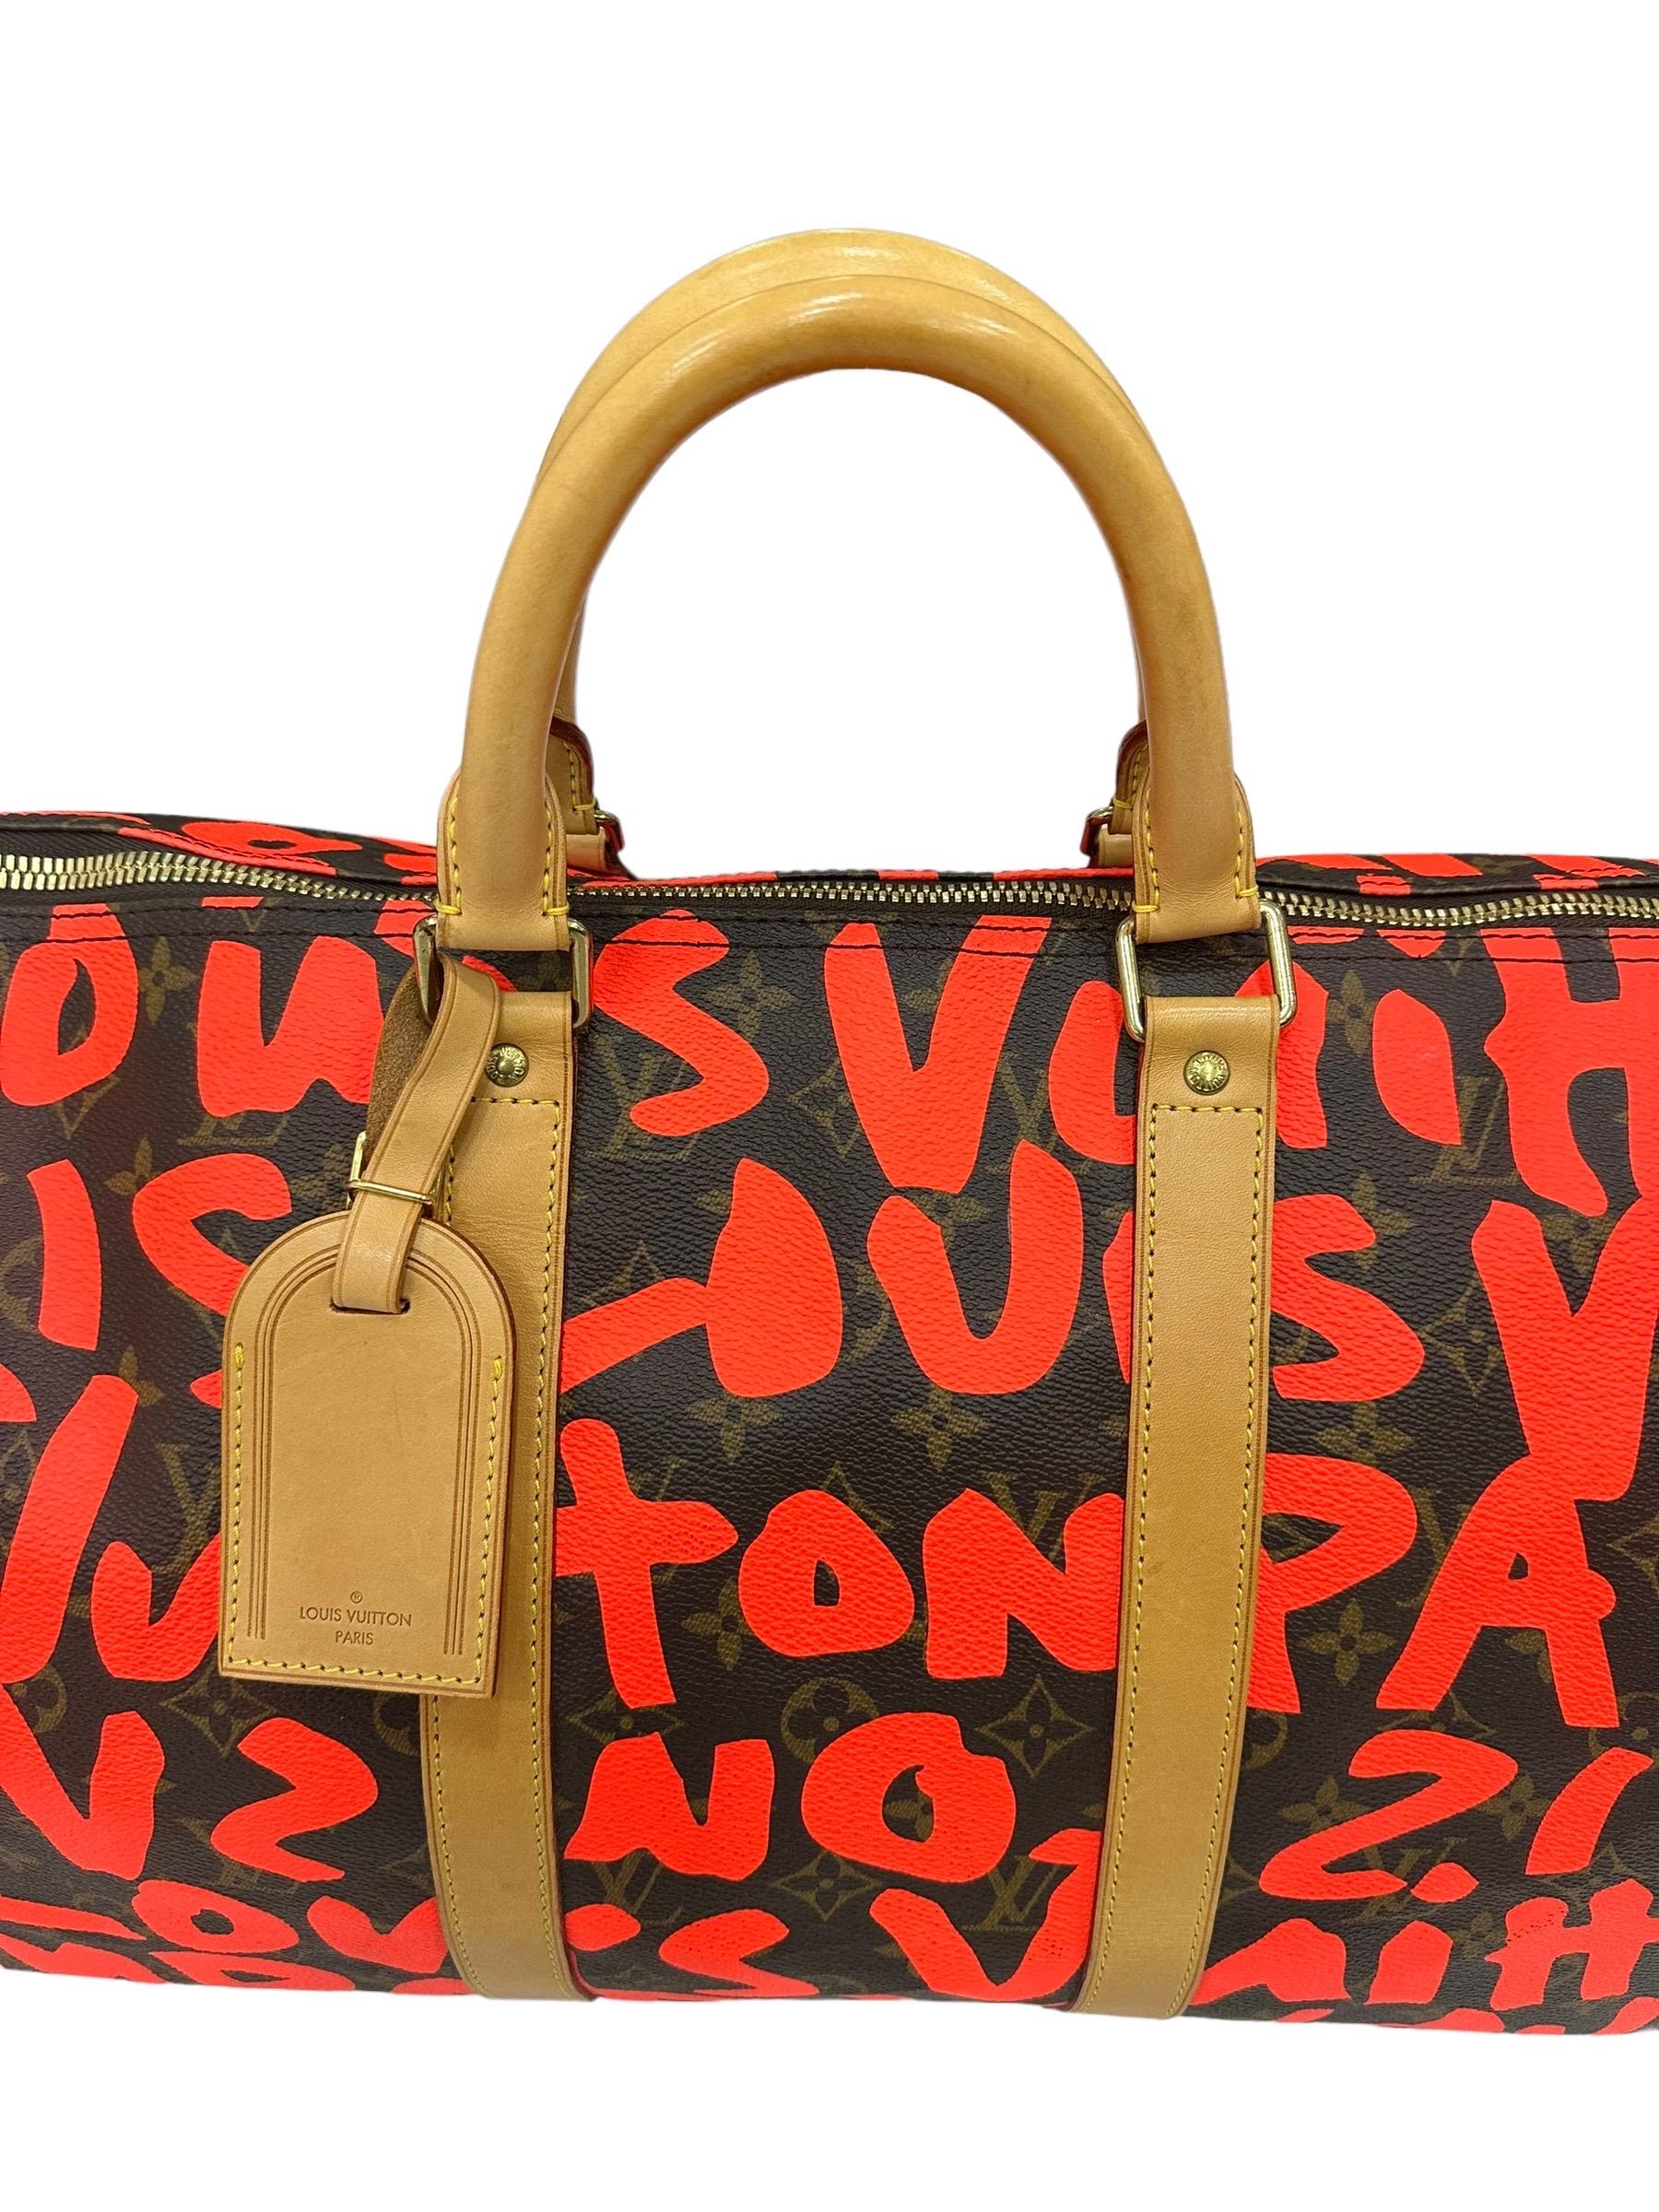 

Louis Vuitton travel bag, Keepall model, size 50, limited edition in collaboration with Steve Sprouse. Made in the classic monogram canvas of the maison and enriched by an orange graffiti print, with inserts in cowhide and golden hardware.